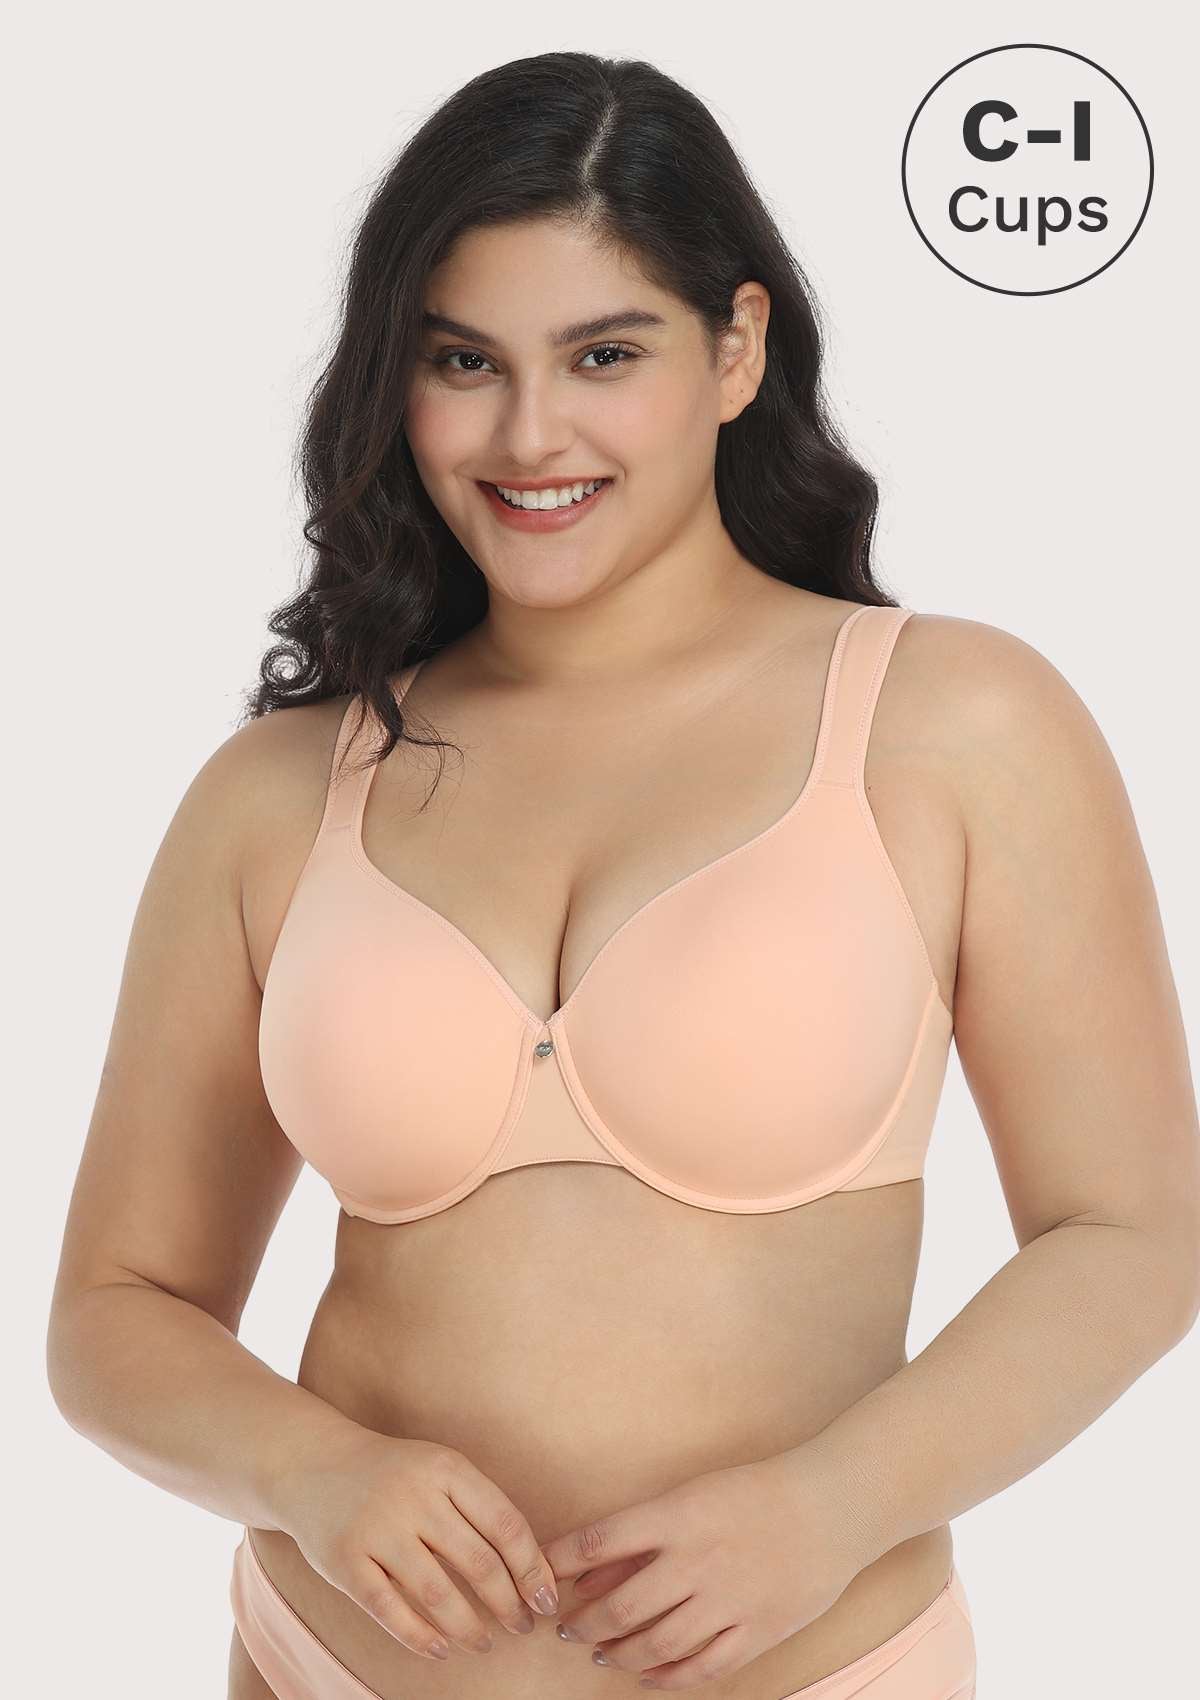 HSIA Patricia Smooth Classic T-shirt Lightly Padded Minimizer Bra - Light Pink / 38 / G